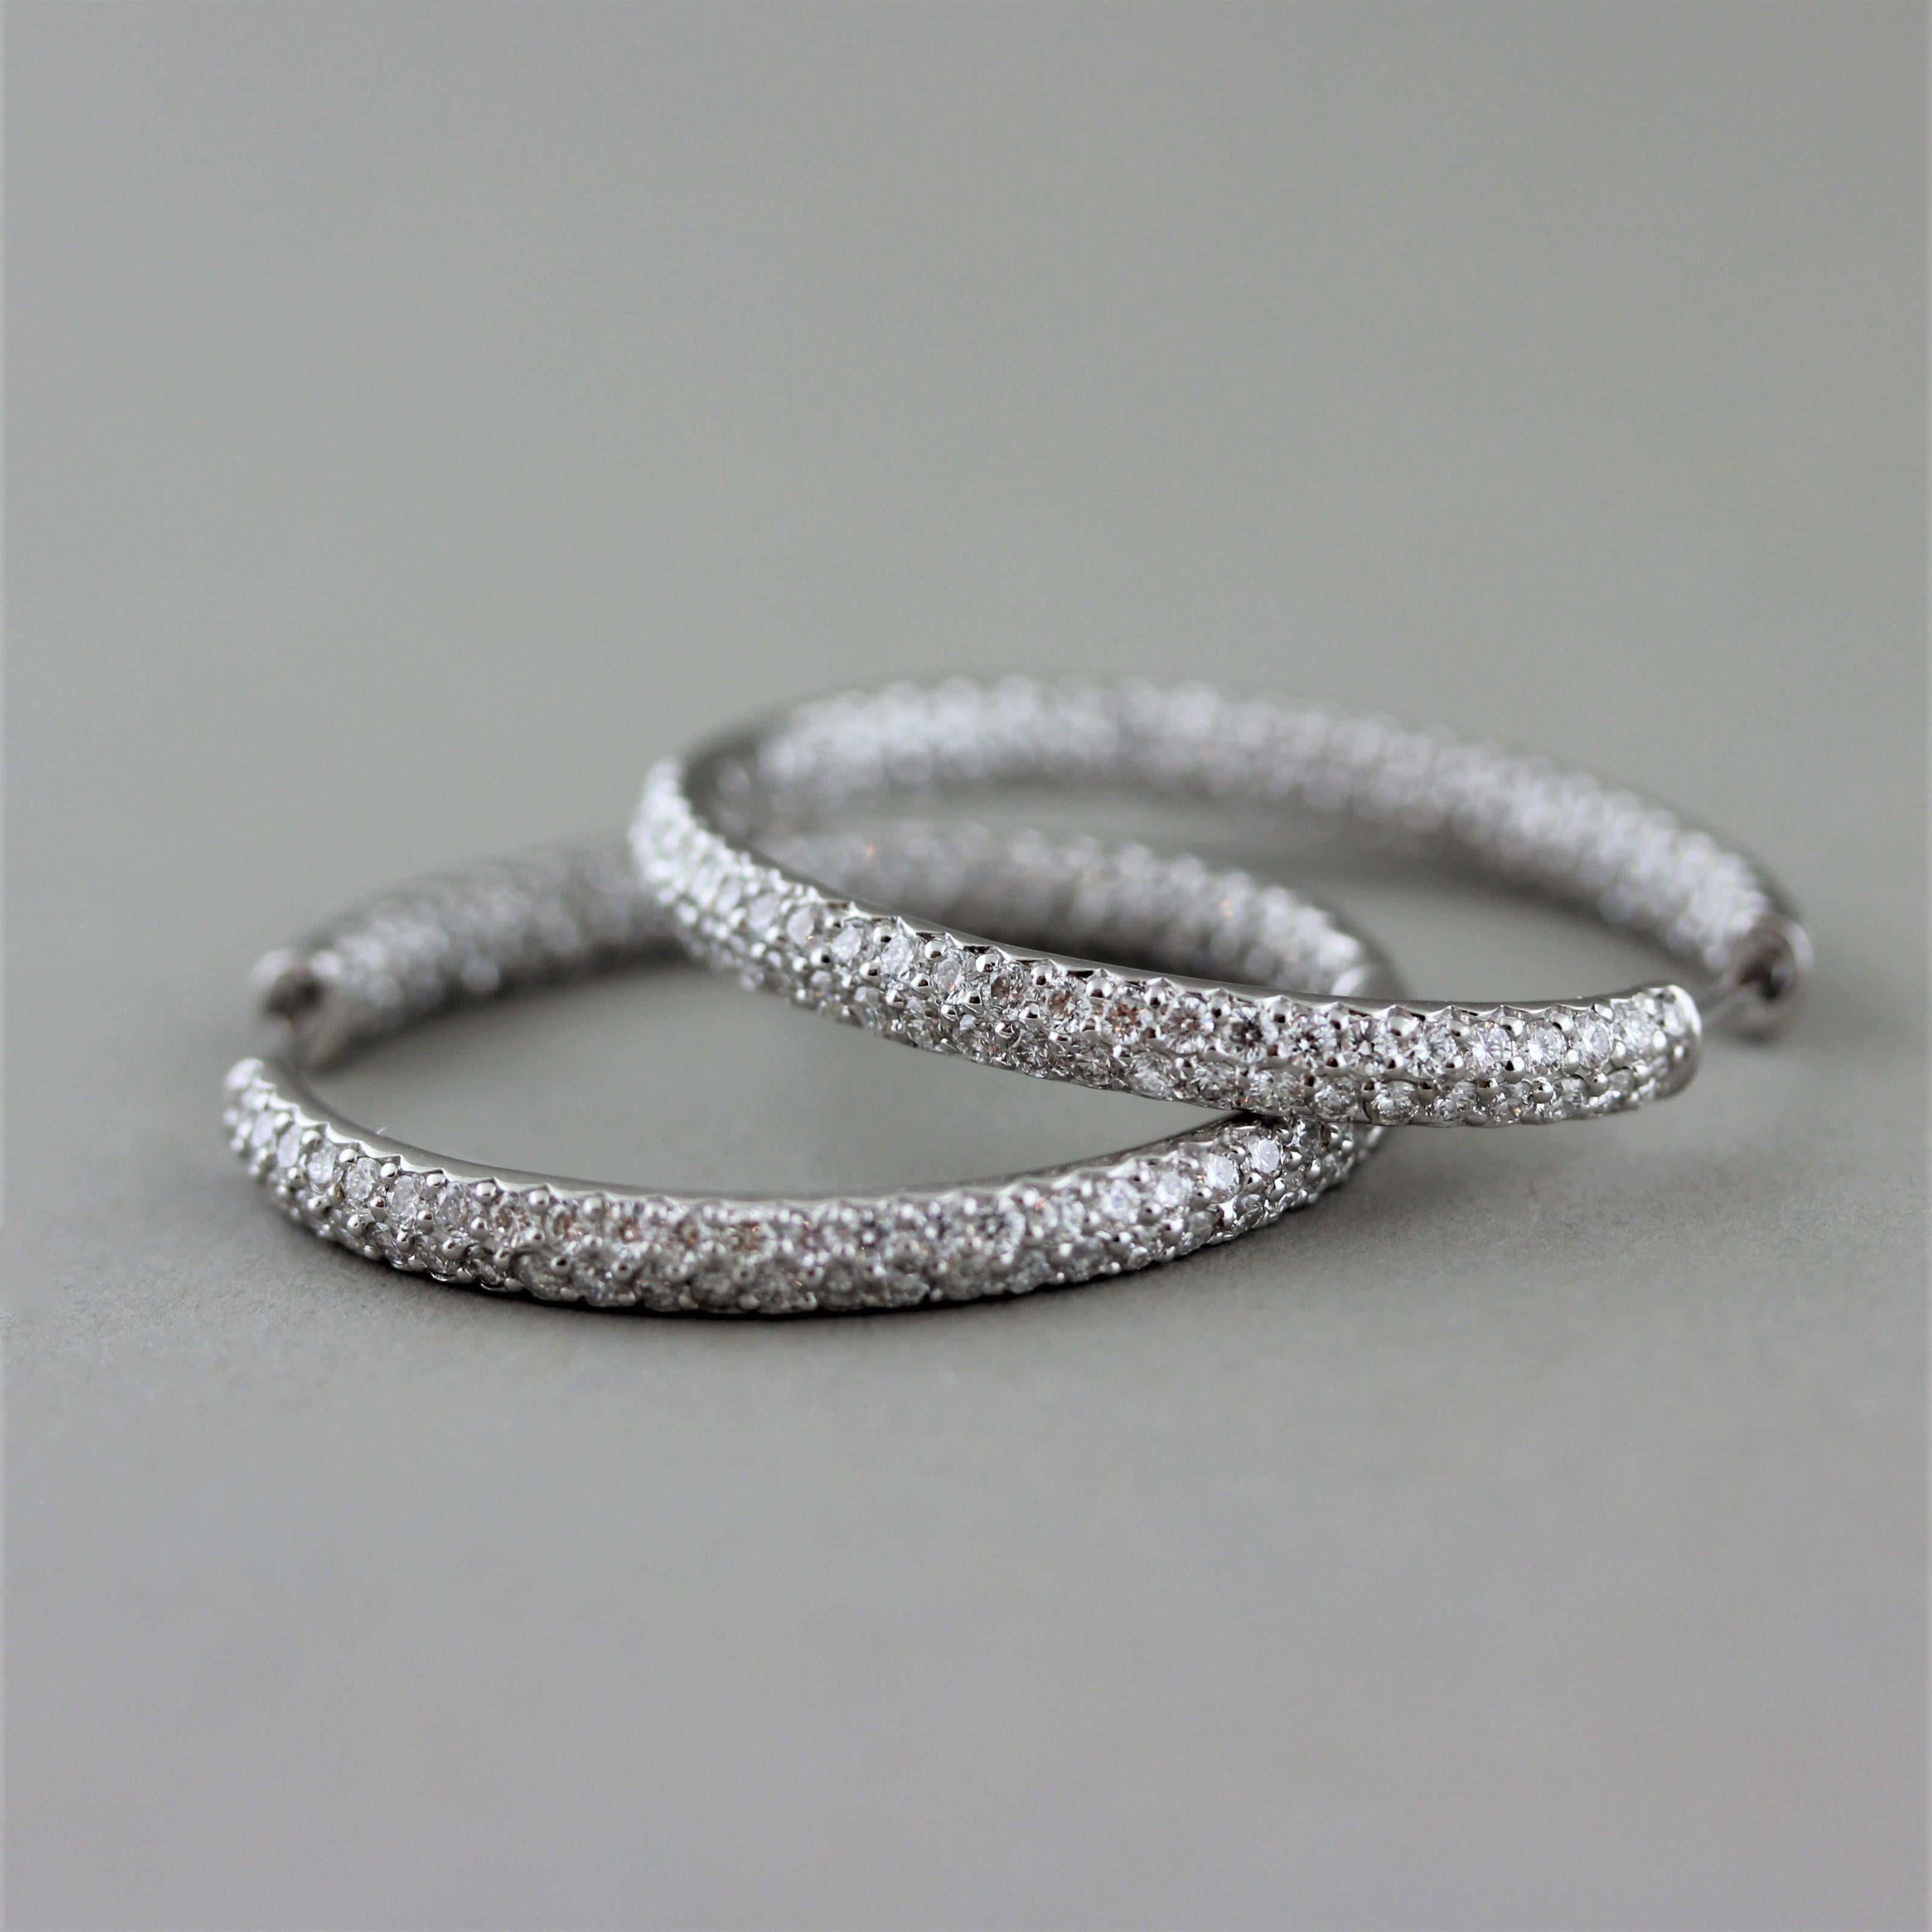 A modern take on the classic hoop earrings! These hoops feature 1.96 carats of round brilliant cut diamonds pavé set in 18k white gold. Earrings that can be worn everyday and dressed up for a night out. 


Length: 1.1 inches


Weight: 7.1 grams
